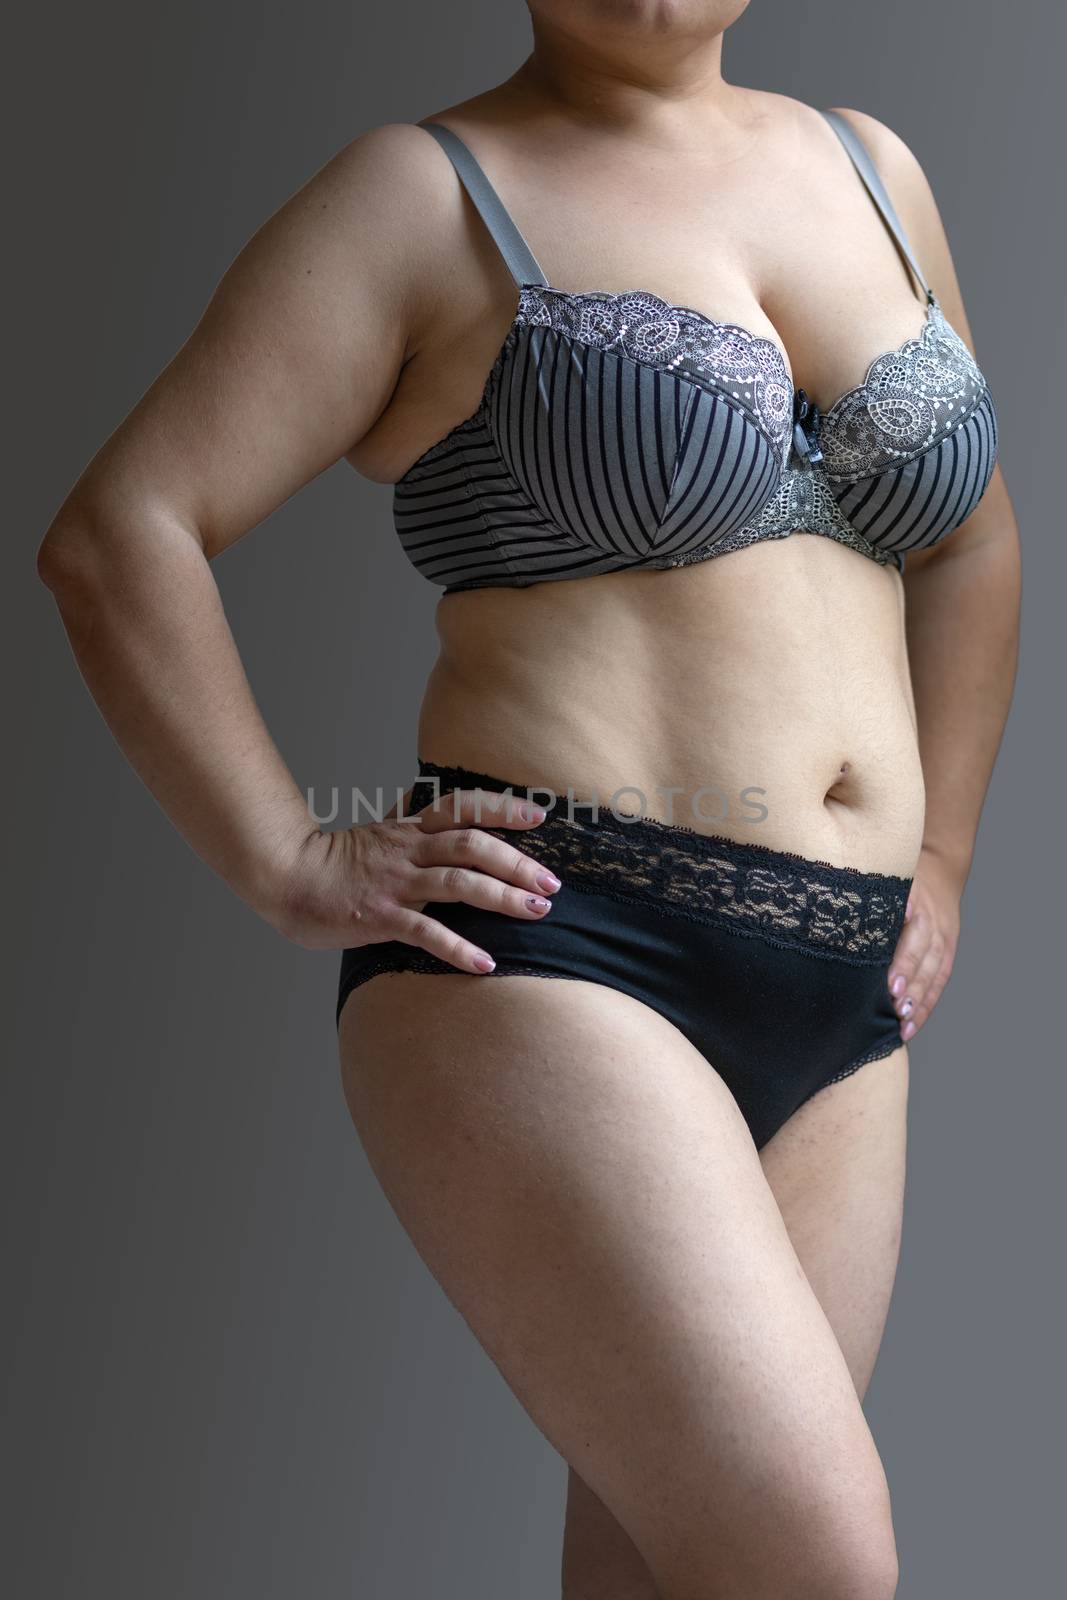 Natural Real Body Plus Size Woman in lingerie by adamr